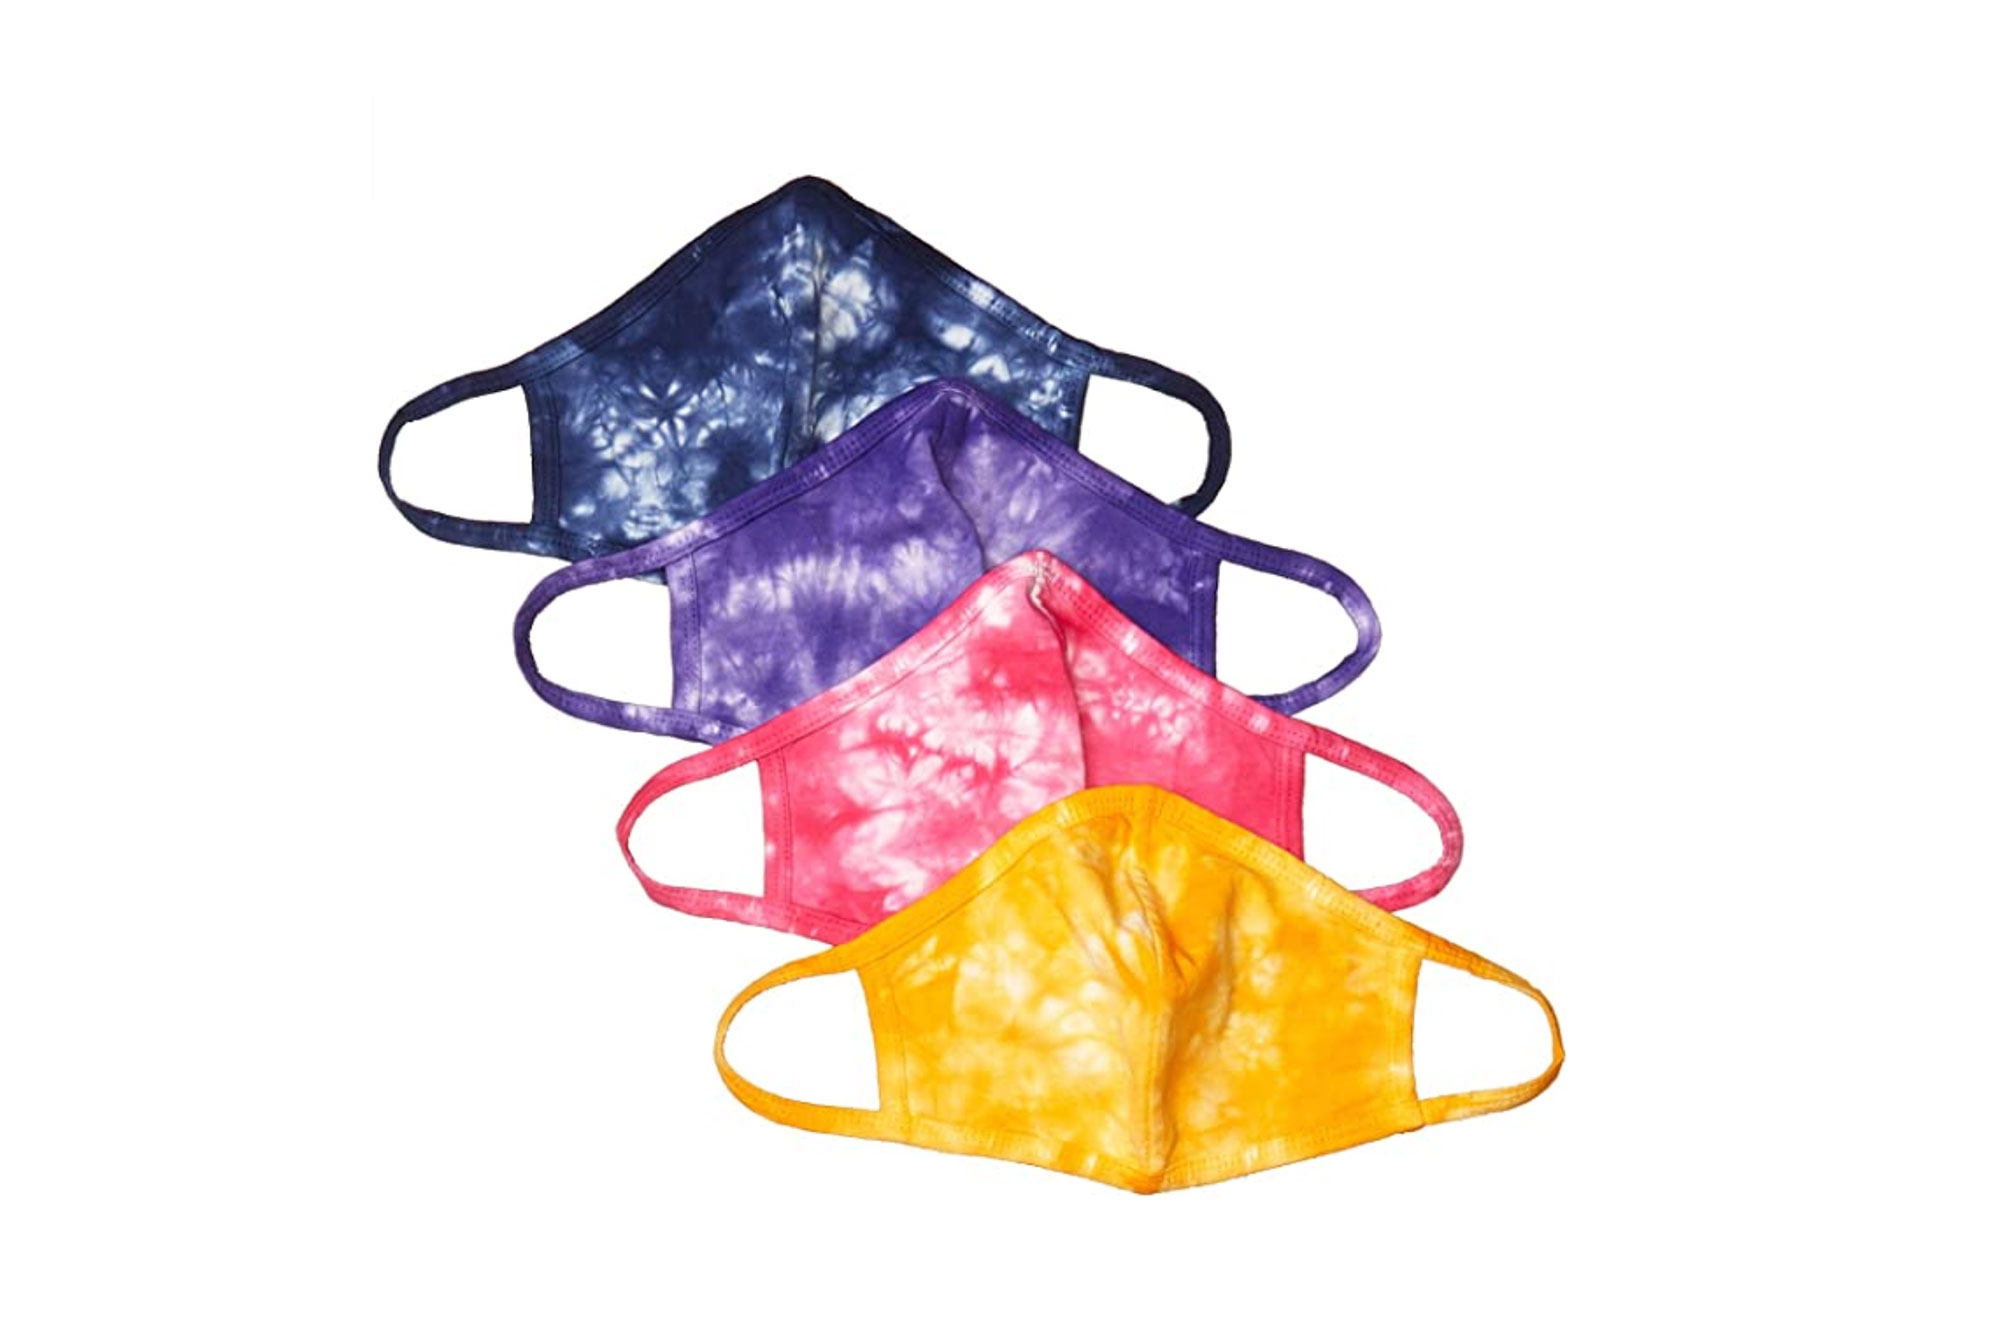 Amazon's Newly Launched Tie-Dye Face Masks Are Amazing